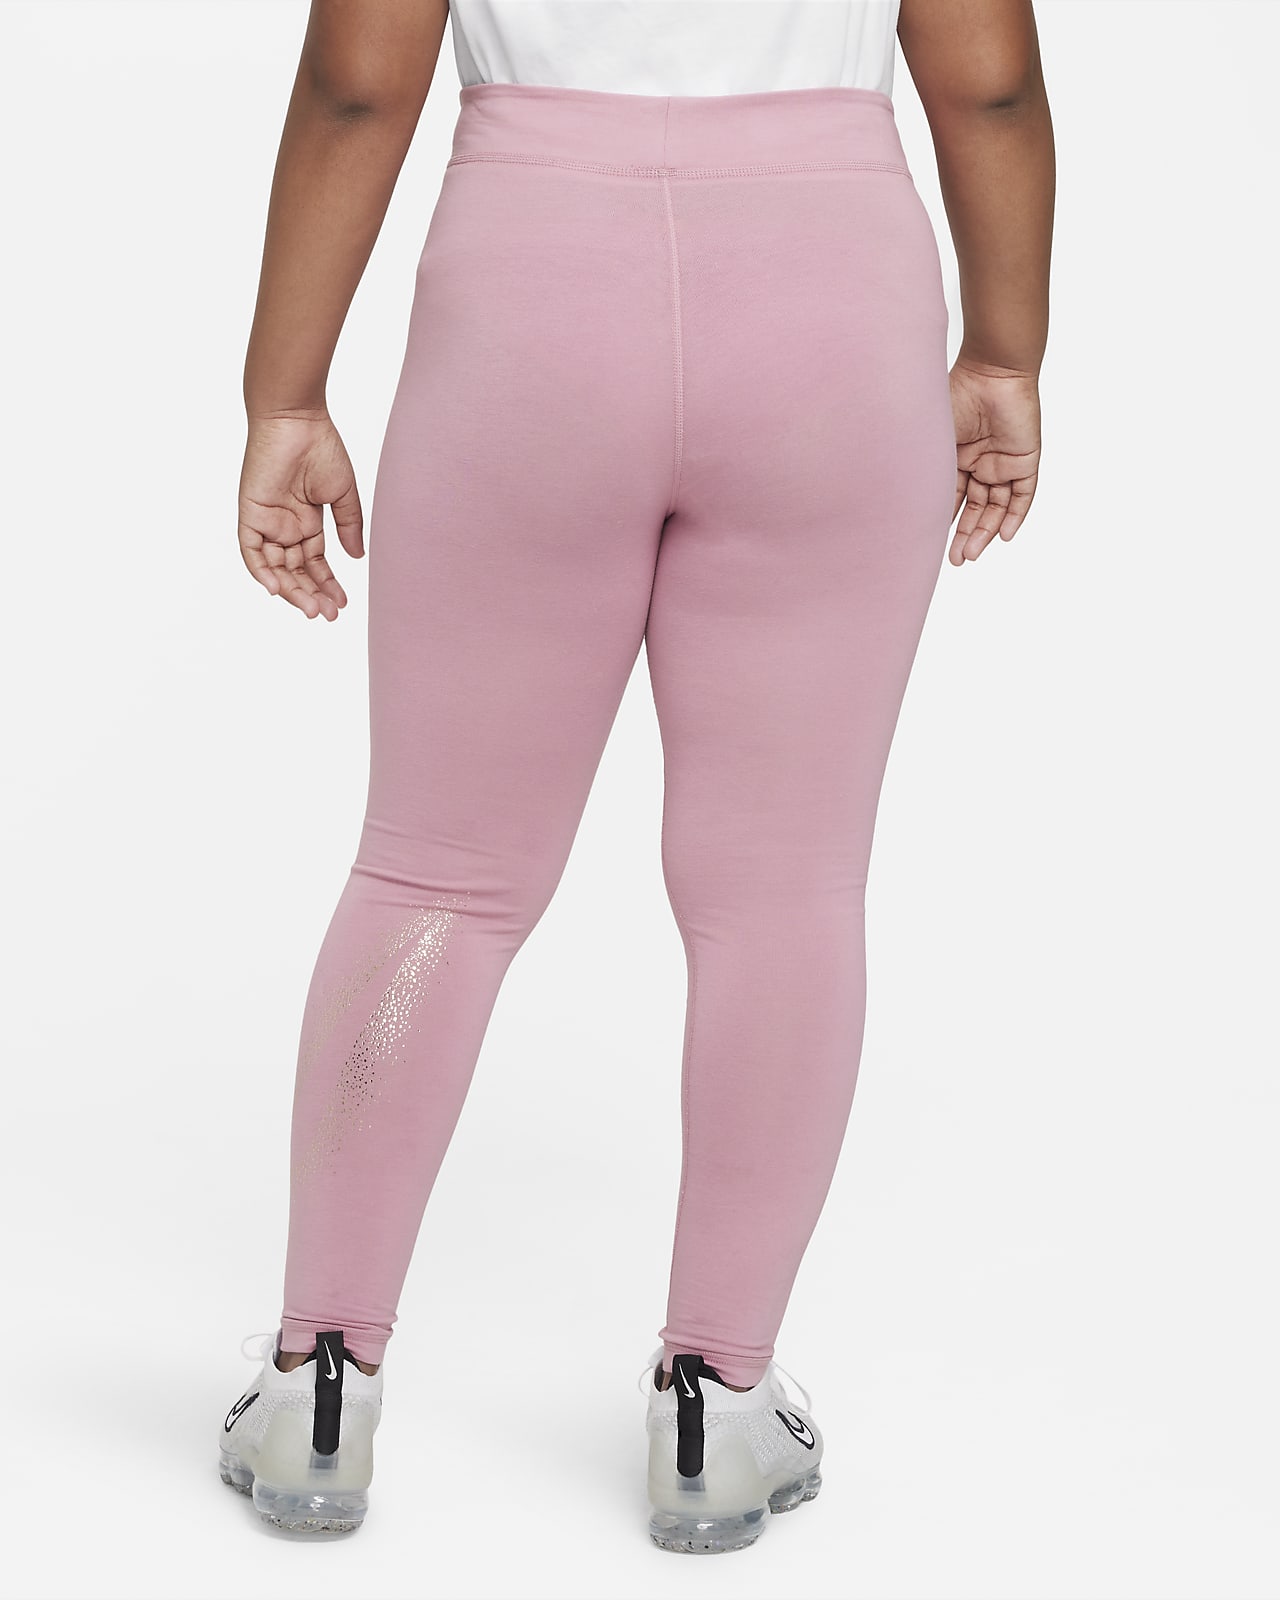 Why do all girls wear tight pants during their workout? - Quora